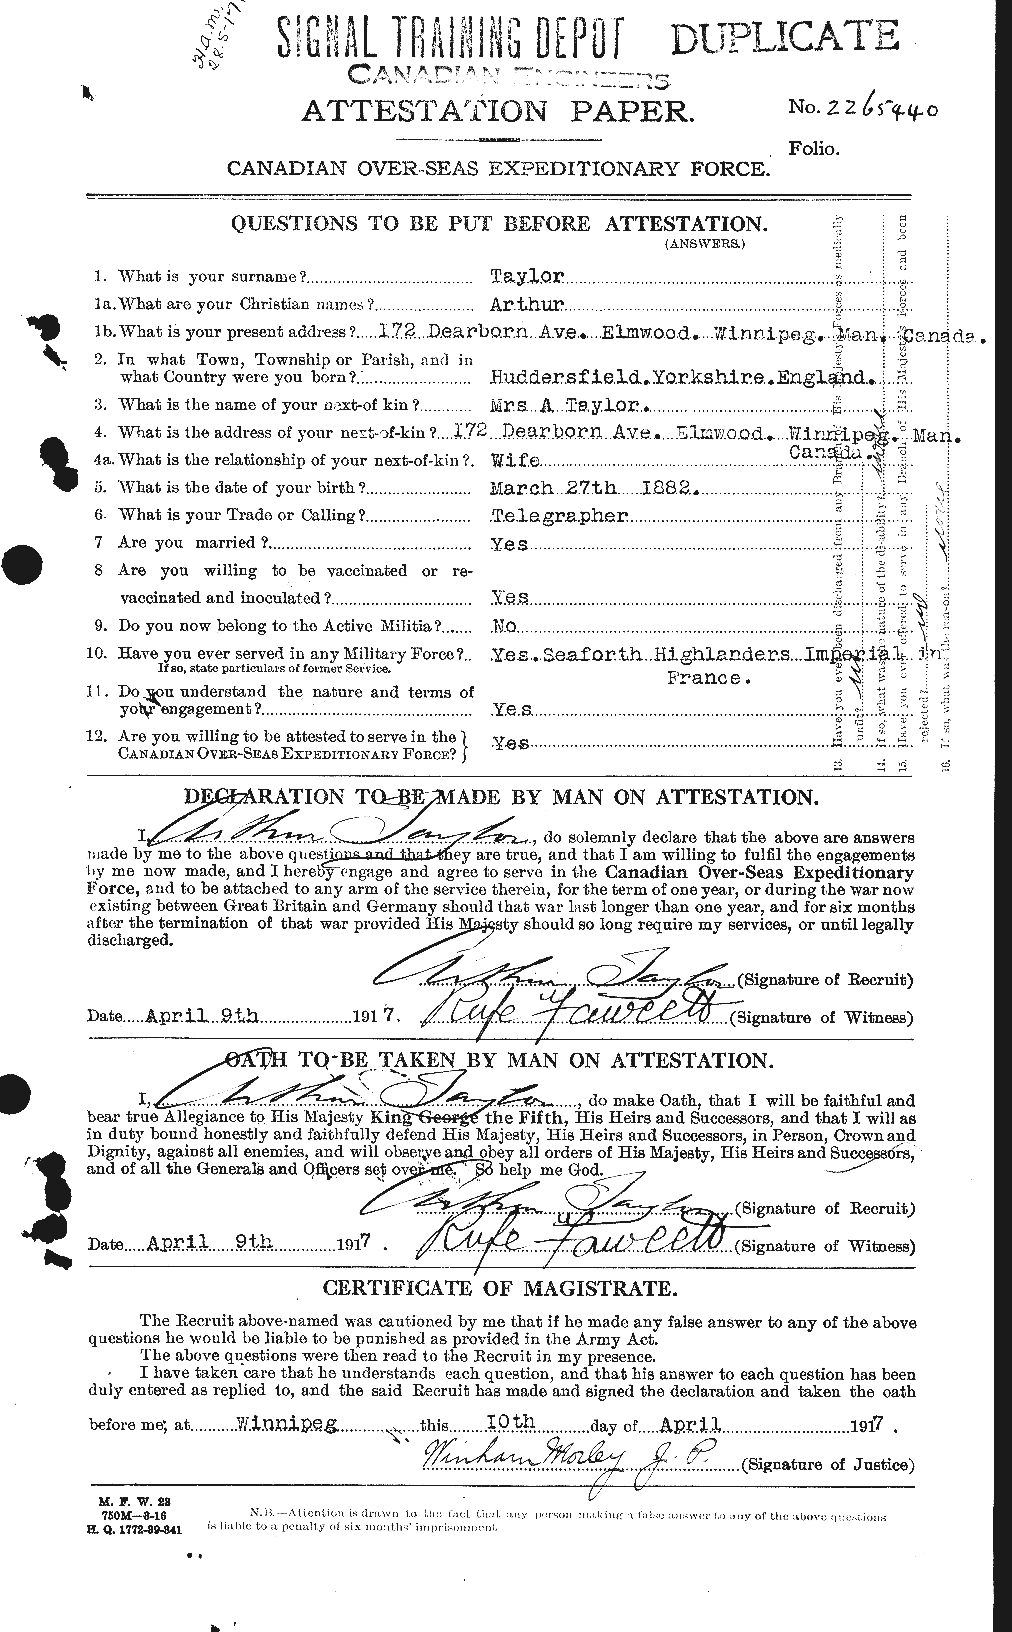 Personnel Records of the First World War - CEF 626704a